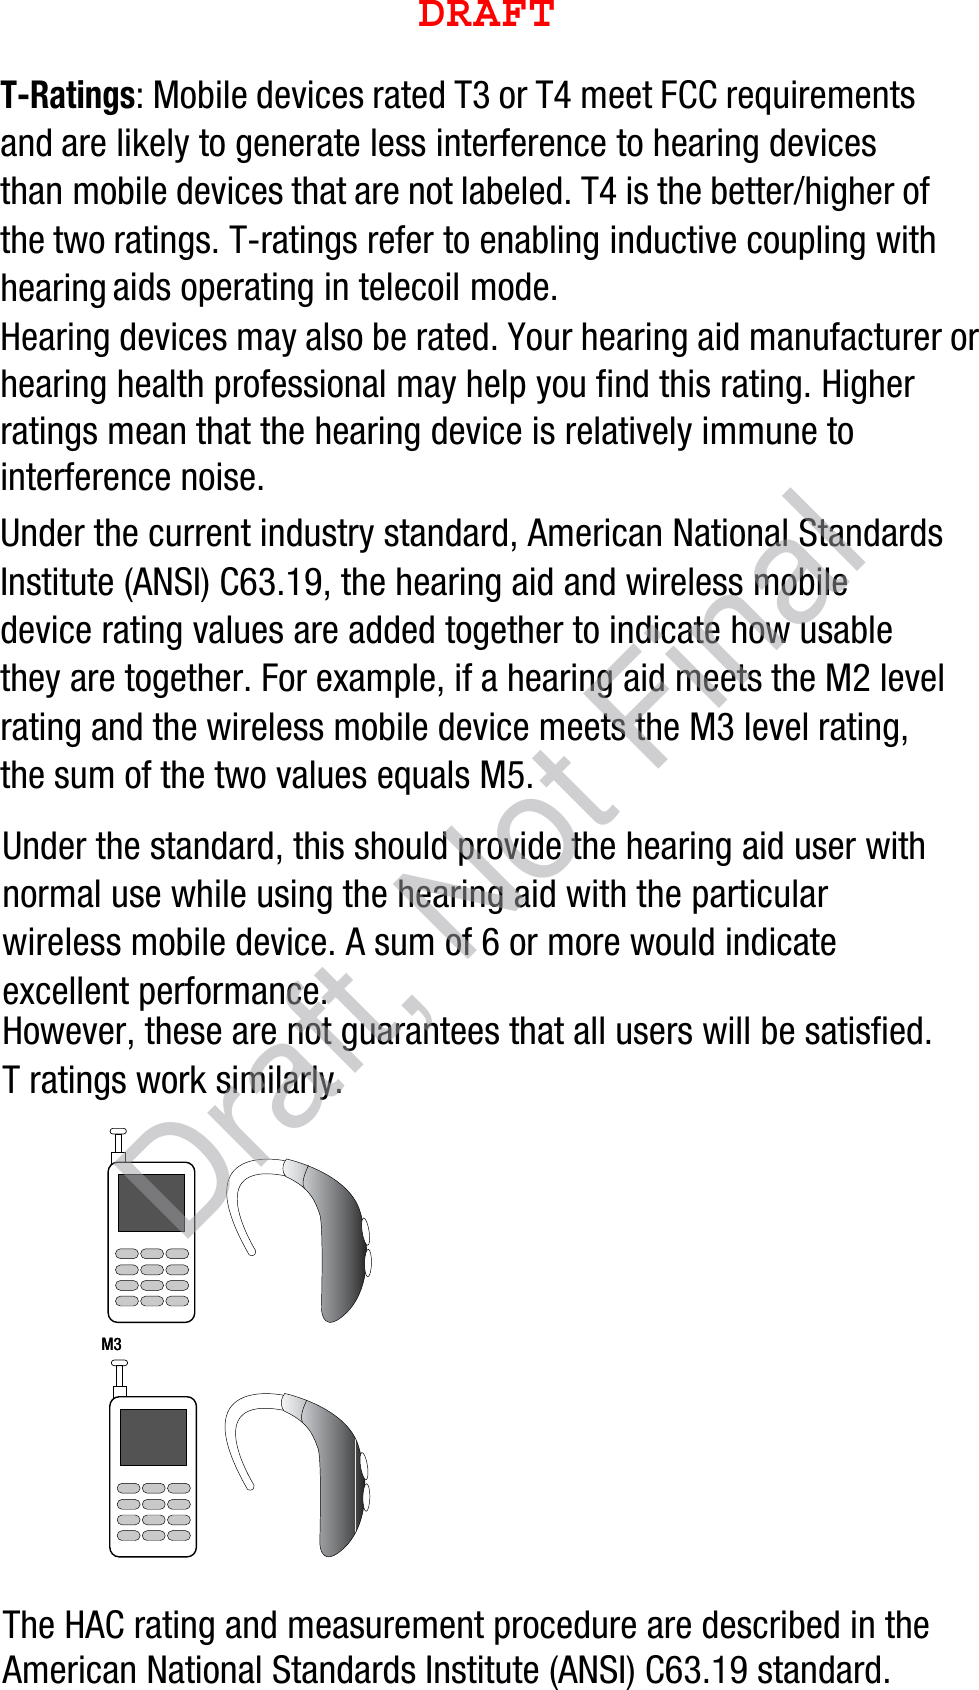 T-Ratings: Mobile devices rated T3 or T4 meet FCC requirements and are likely to generate less interference to hearing devices than mobile devices that are not labeled. T4 is the better/higher of the two ratings. T-ratings refer to enabling inductive coupling with hearing aids operating in telecoil mode.Hearing devices may also be rated. Your hearing aid manufacturer or hearing health professional may help you find this rating. Higher ratings mean that the hearing device is relatively immune to interference noise. Under the current industry standard, American National Standards Institute (ANSI) C63.19, the hearing aid and wireless mobile device rating values are added together to indicate how usable they are together. For example, if a hearing aid meets the M2 level rating and the wireless mobile device meets the M3 level rating, the sum of the two values equals M5. Under the standard, this should provide the hearing aid user with normal use while using the hearing aid with the particular wireless mobile device. A sum of 6 or more would indicate excellent performance.  However, these are not guarantees that all users will be satisfied. T ratings work similarly.The HAC rating and measurement procedure are described in the American National Standards Institute (ANSI) C63.19 standard.    M3       M3        DRAFTDraft, Not Final